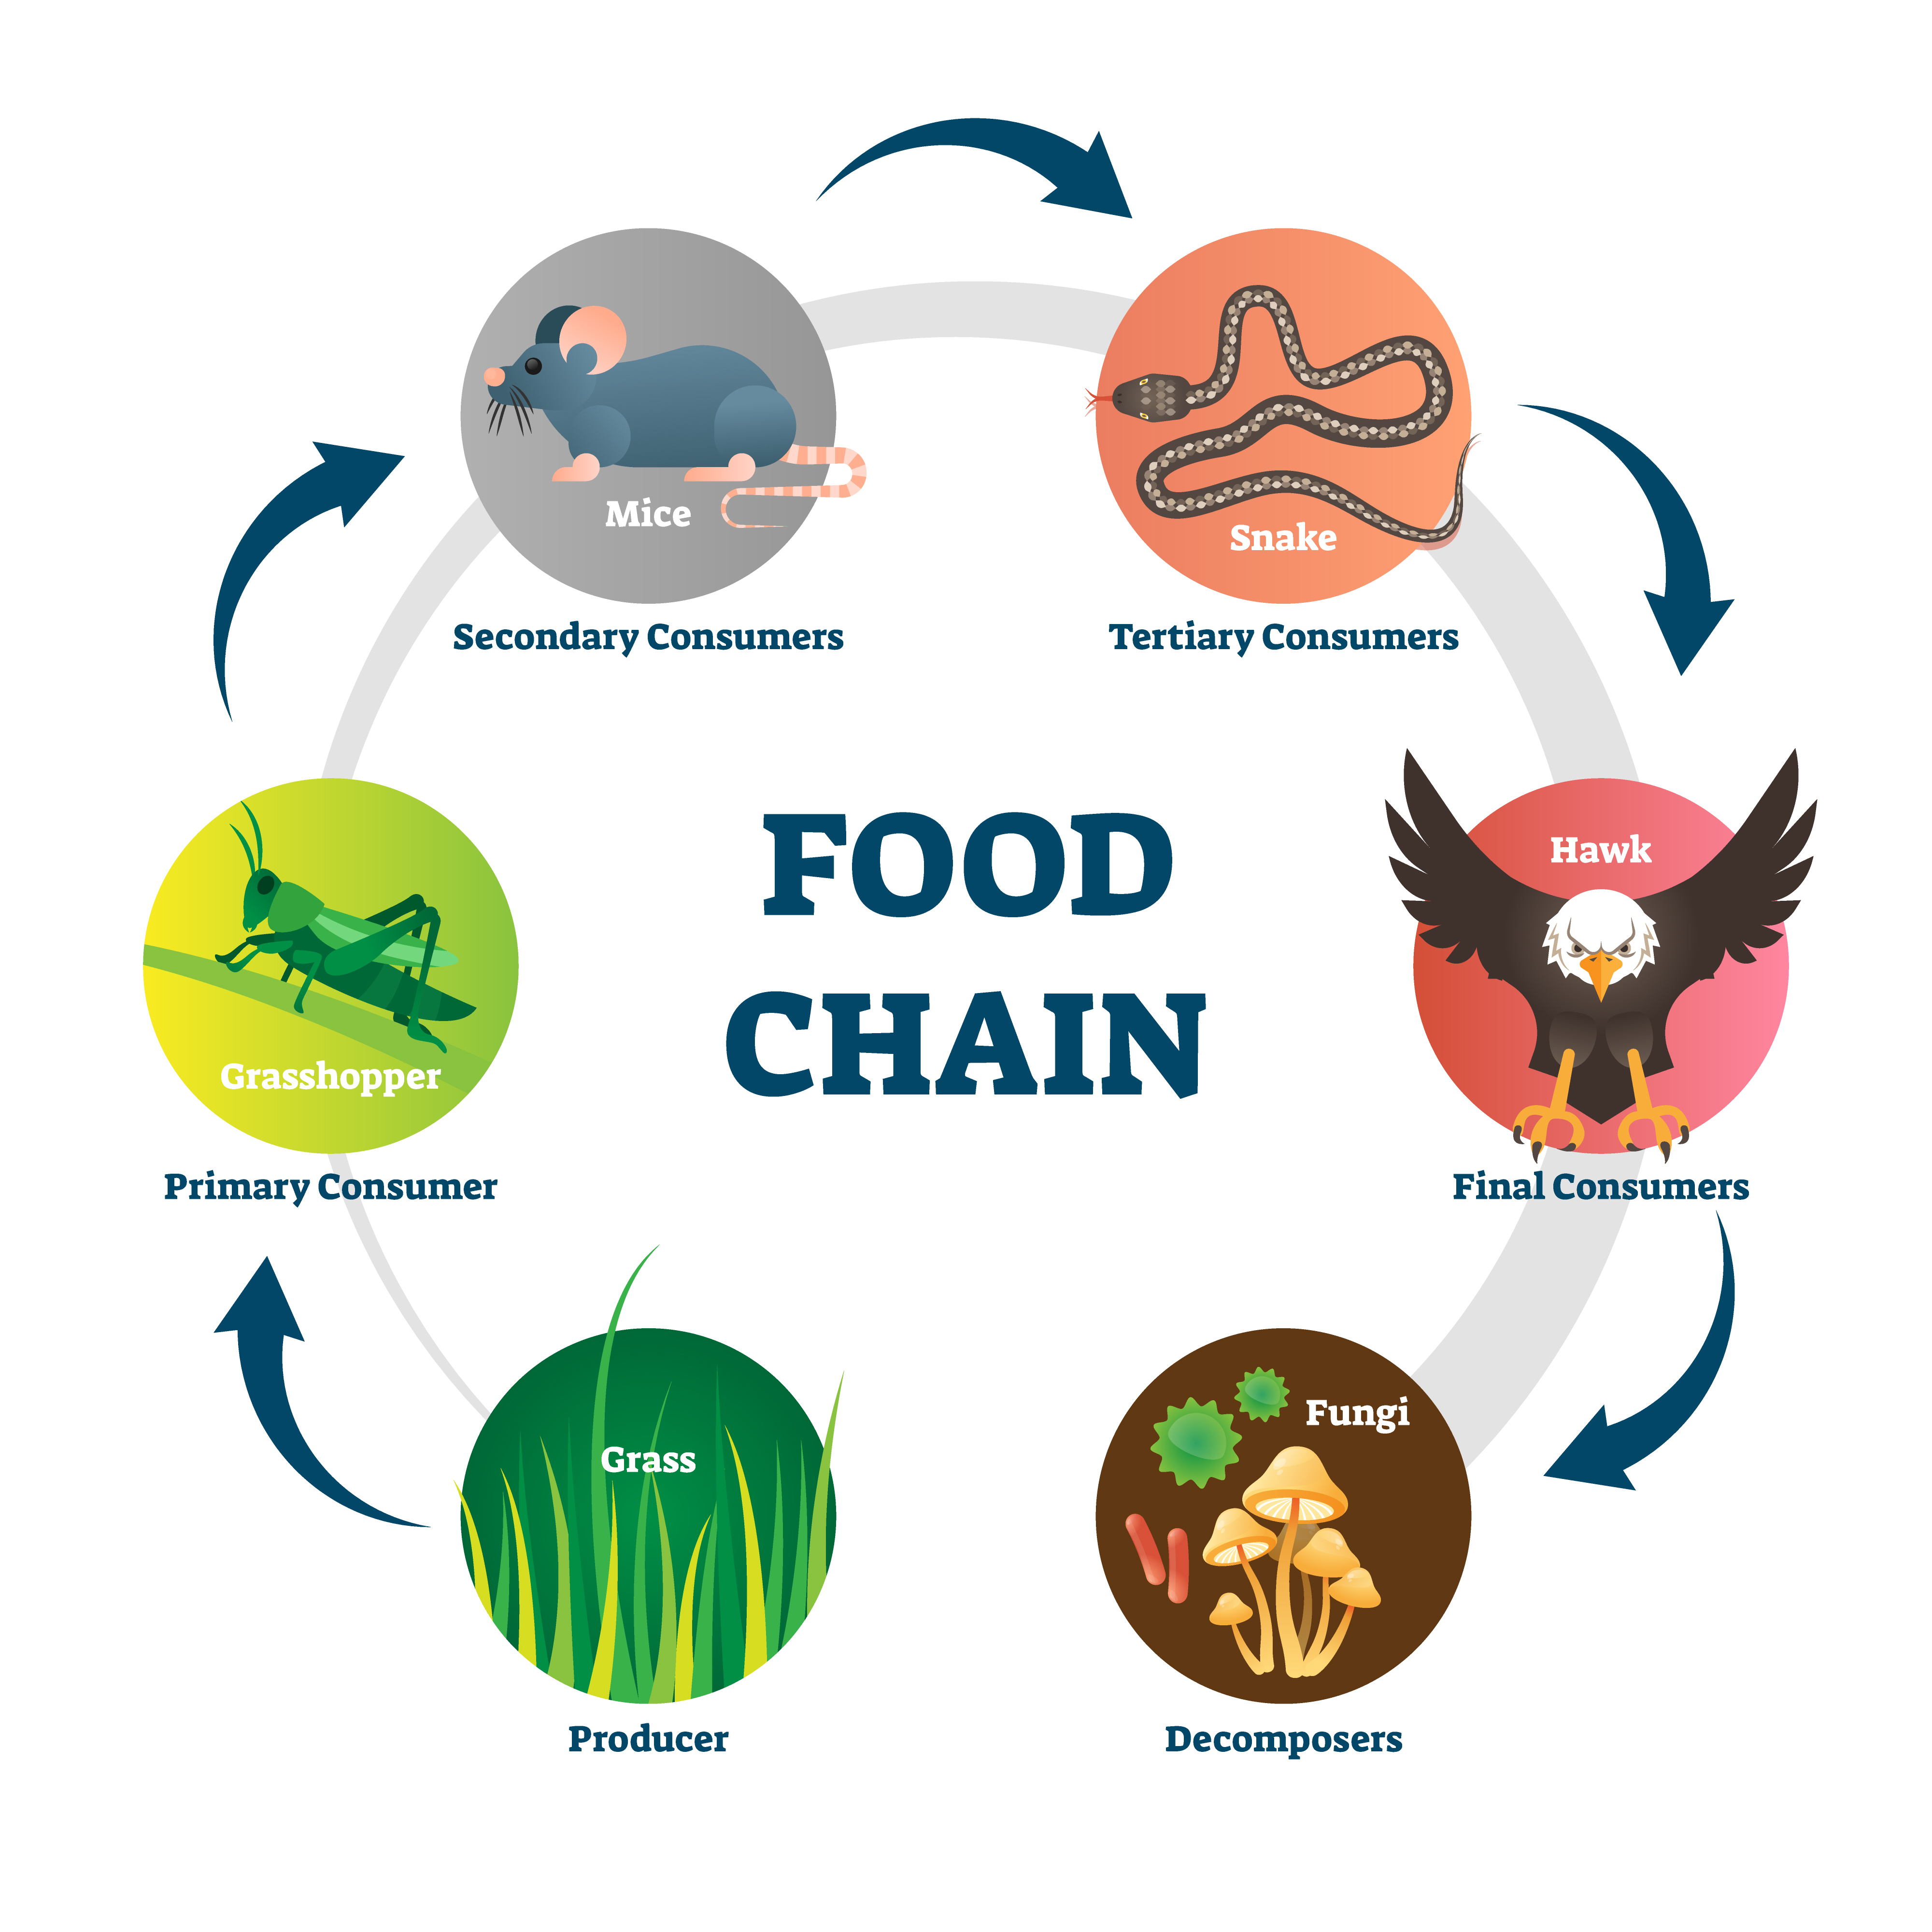 consumers food chain clipart